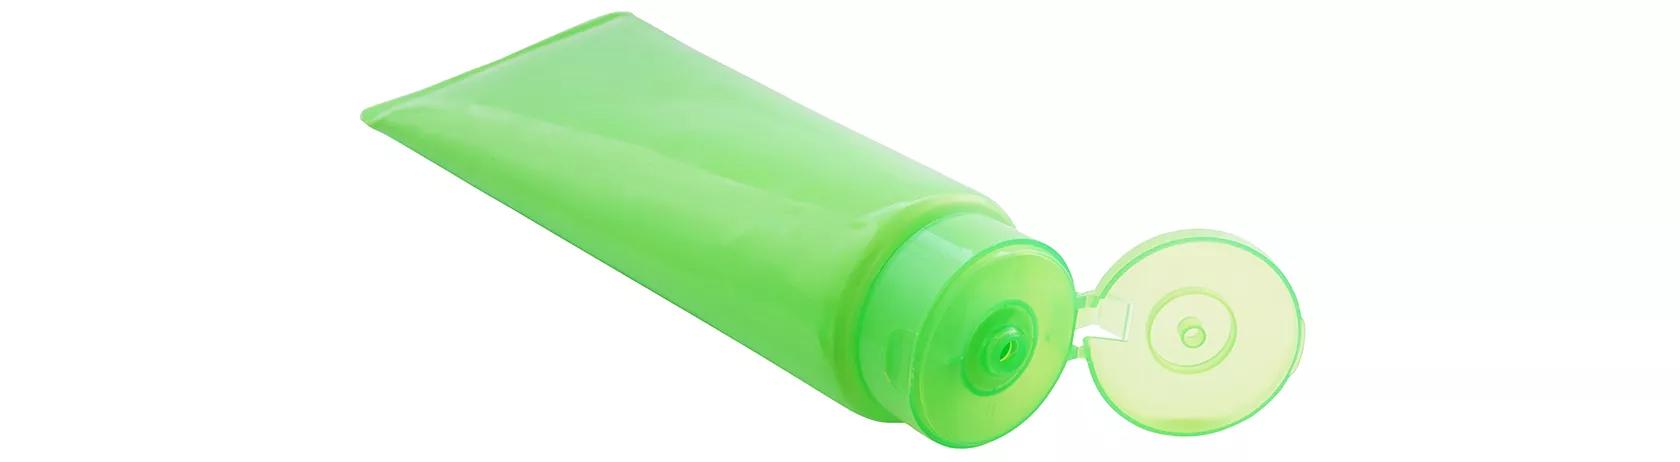 Green plastic tube with open living hinge lid